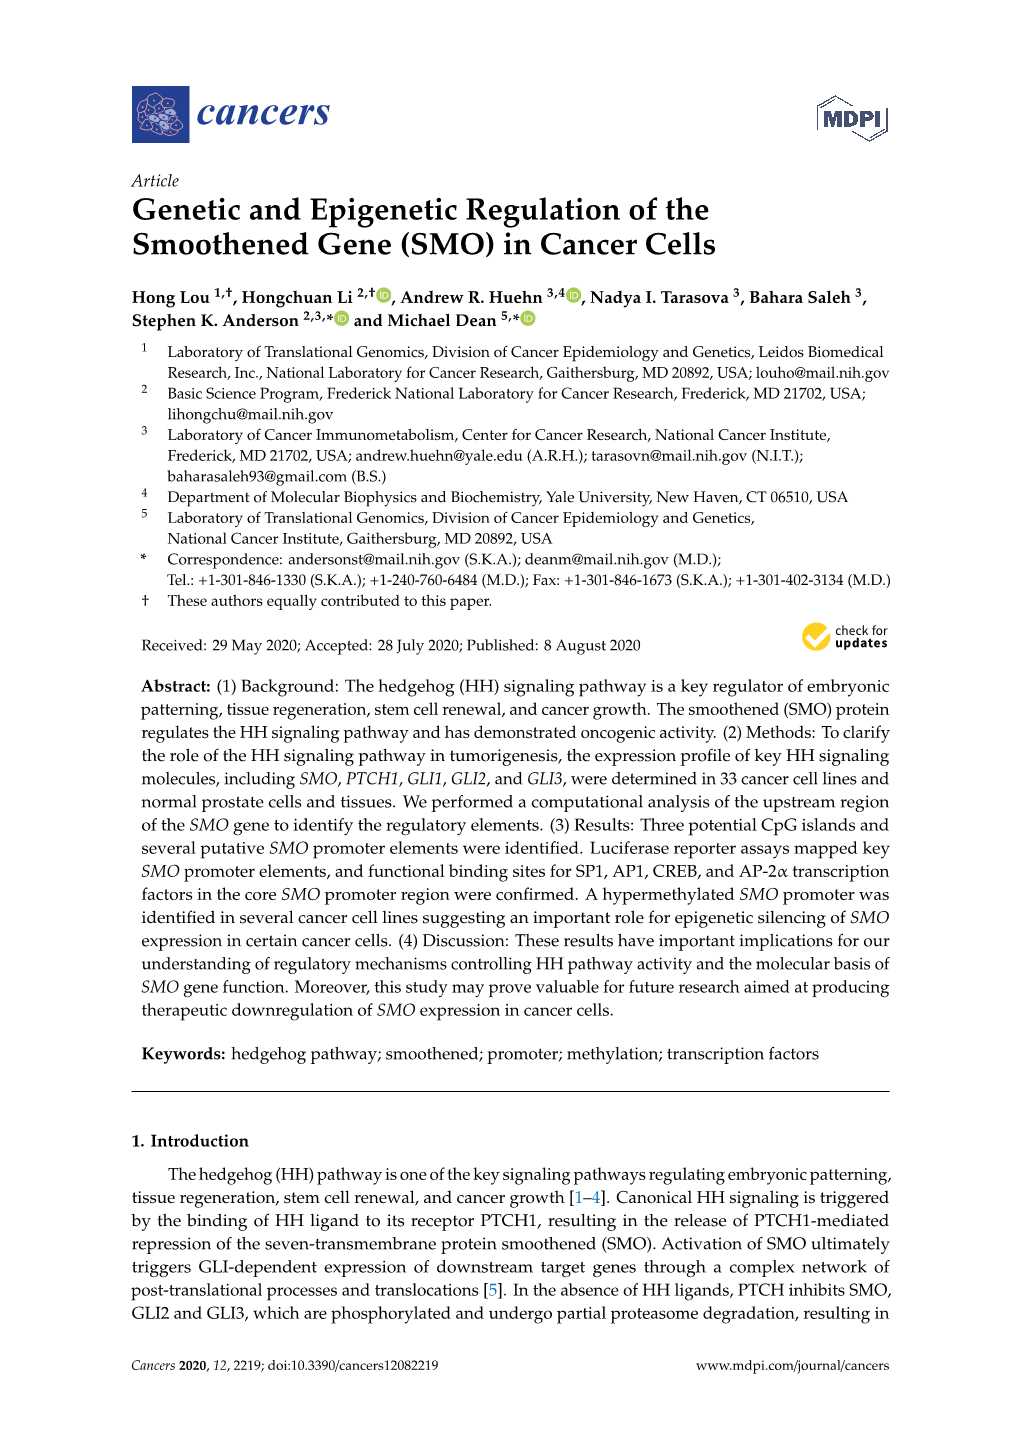 Genetic and Epigenetic Regulation of the Smoothened Gene (SMO) in Cancer Cells